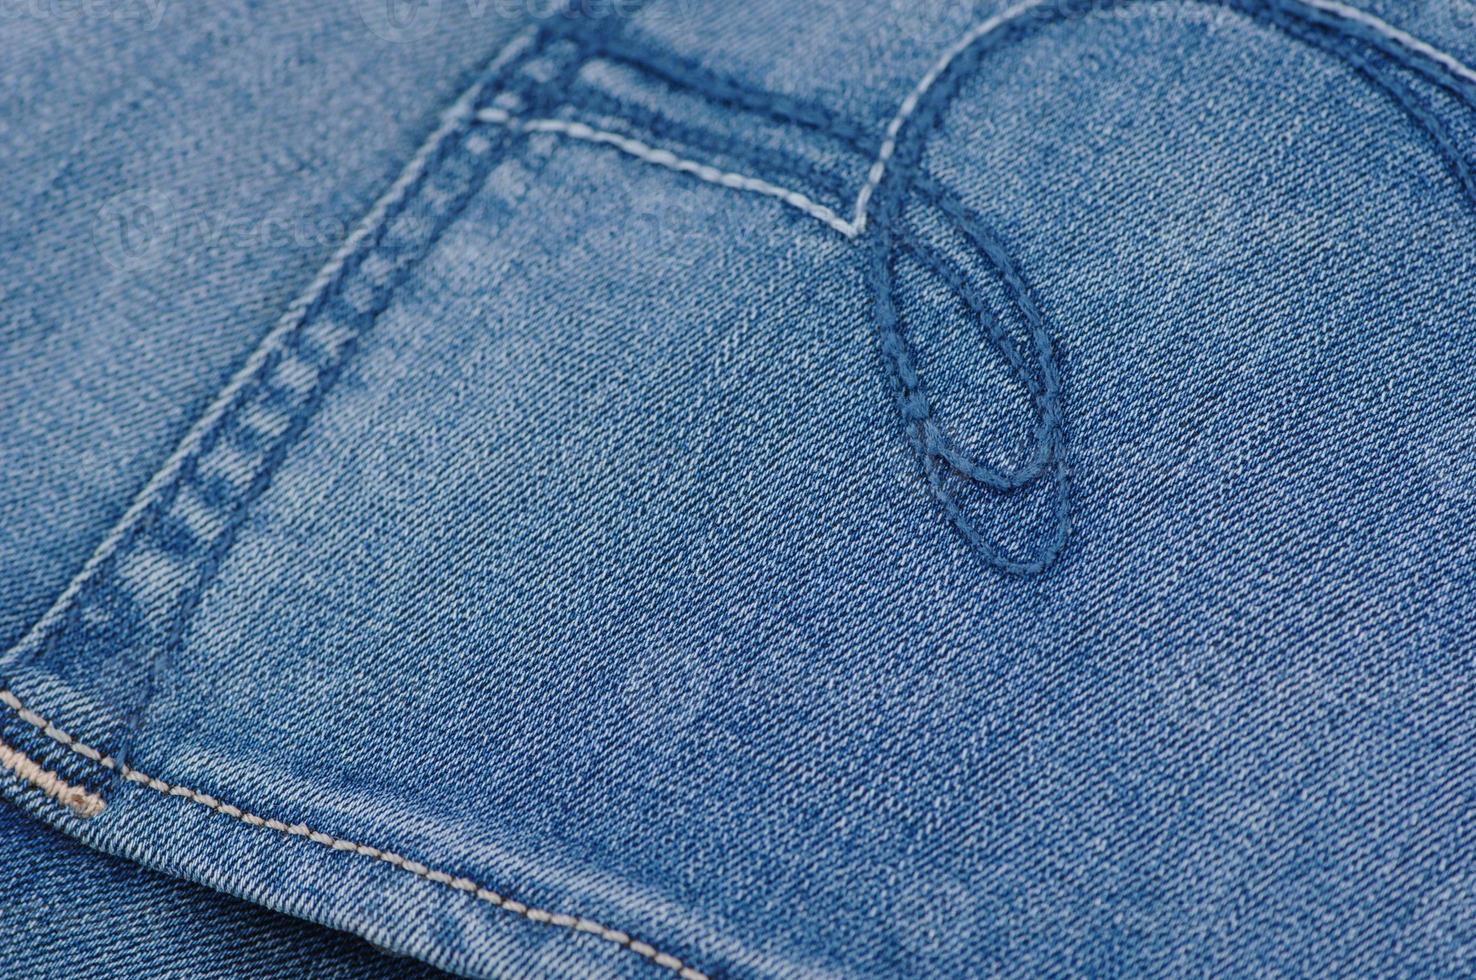 part of the blue denim pants with back pockets, closeup photo